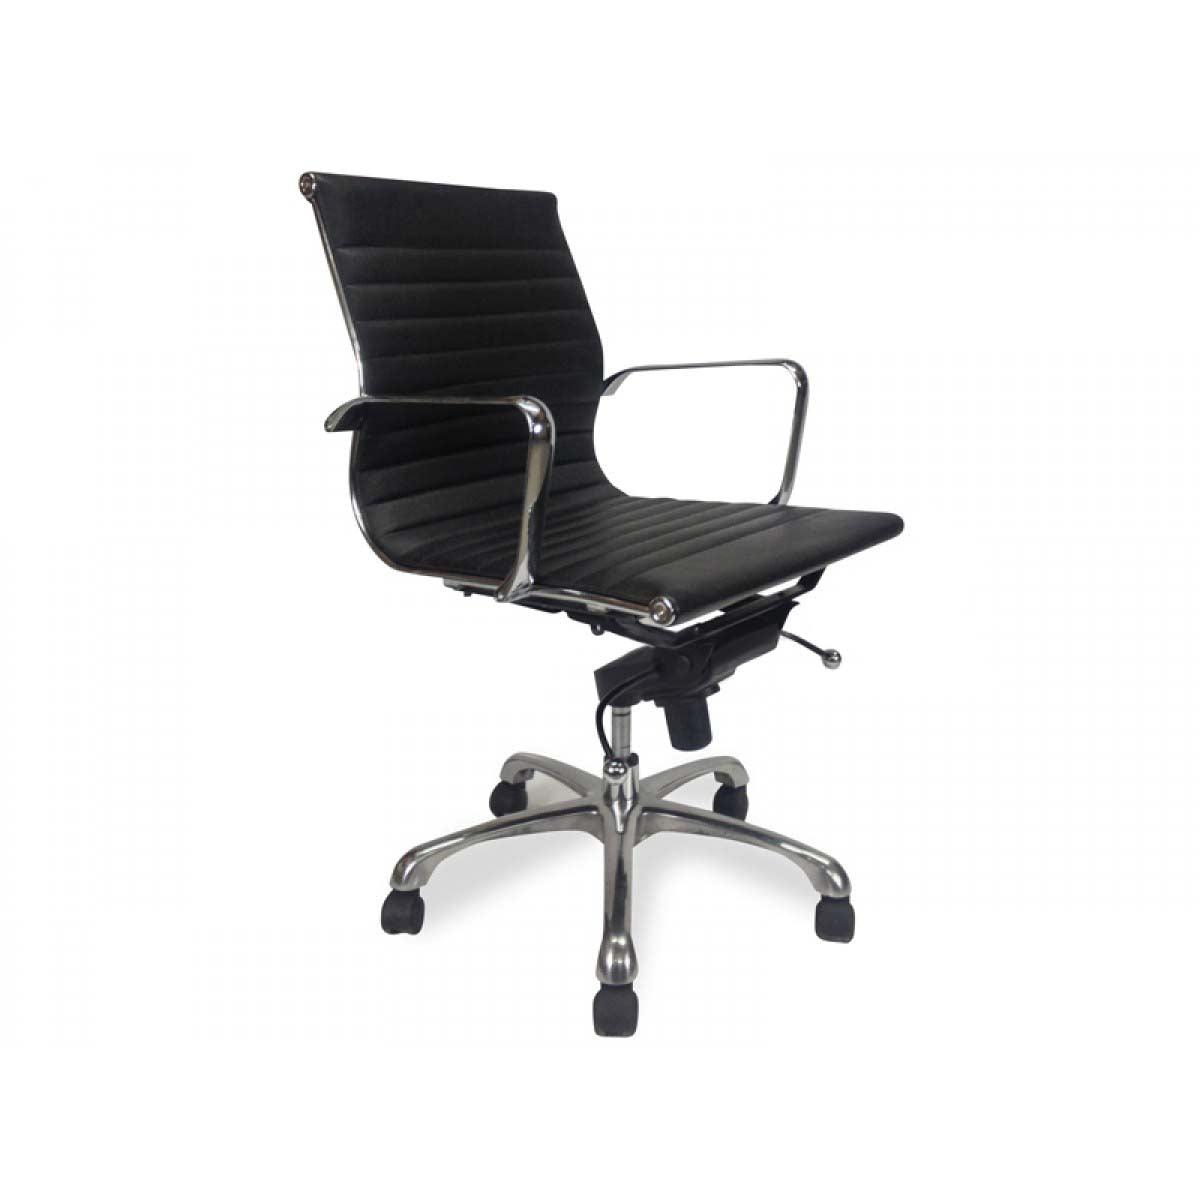 COC216 Leather Office Chair - Black - Furniture Castle